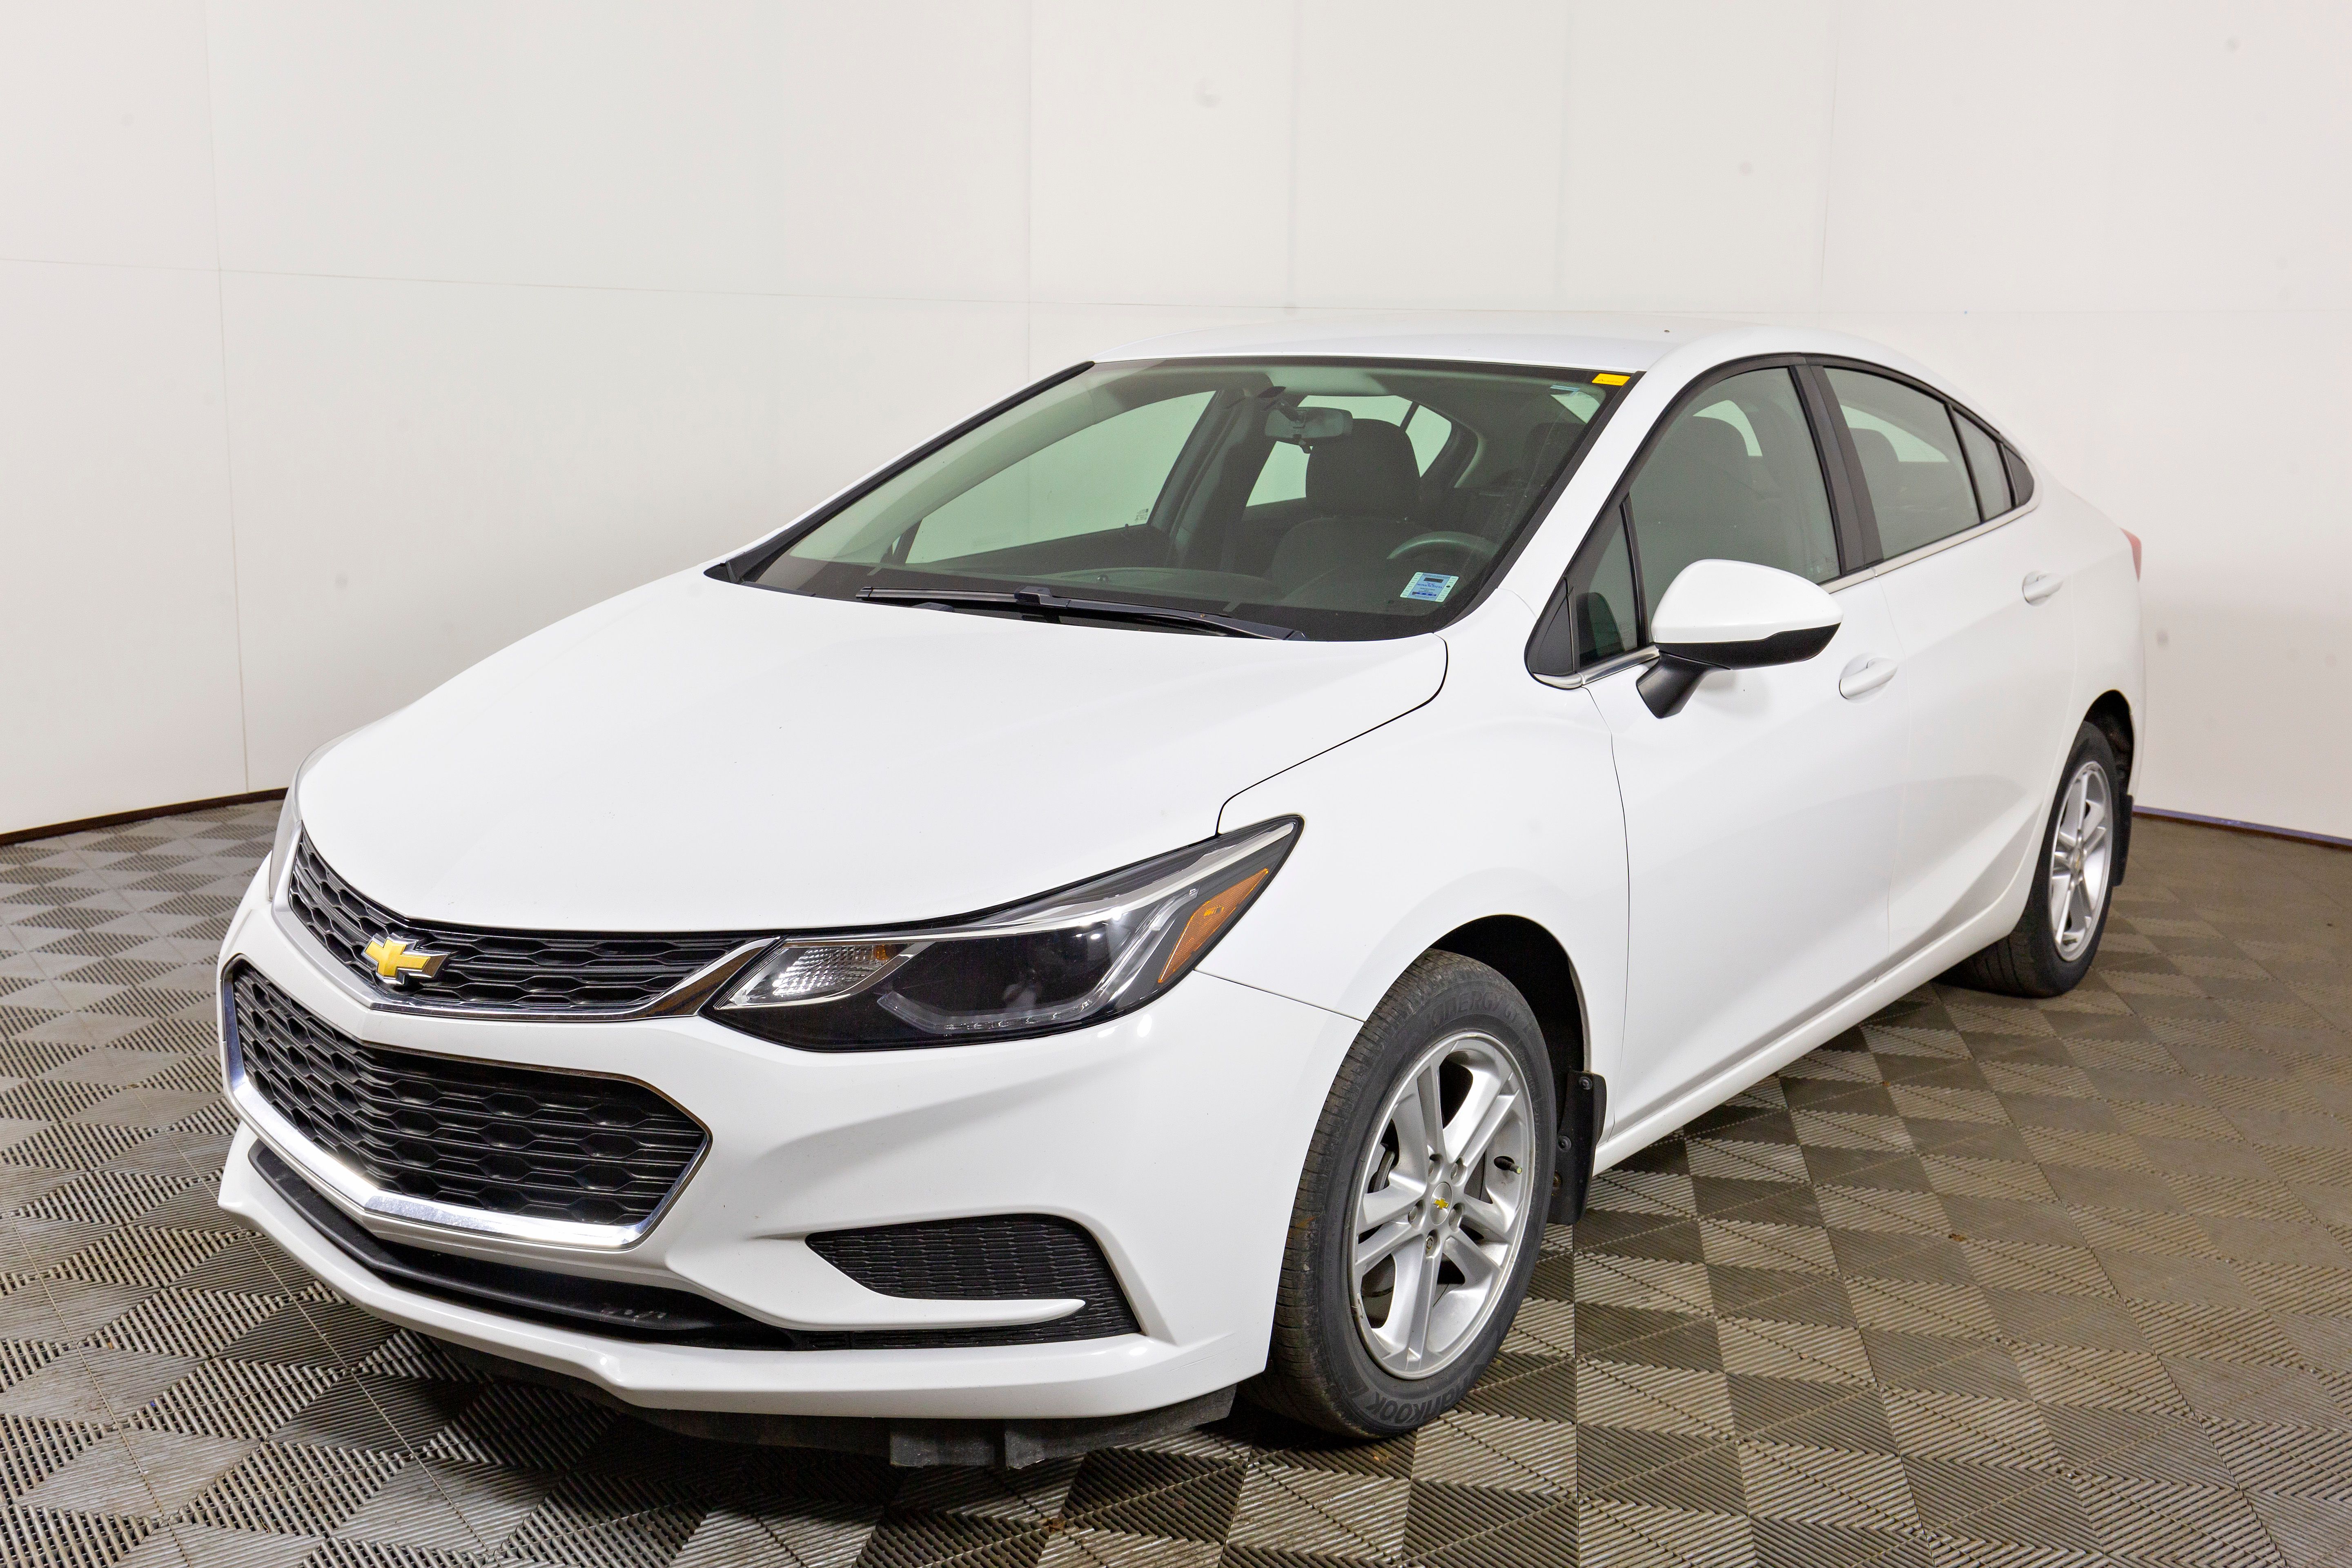 Pre-Owned 2016 CHEVROLET Cruze LT Front Wheel Drive 4dr Car